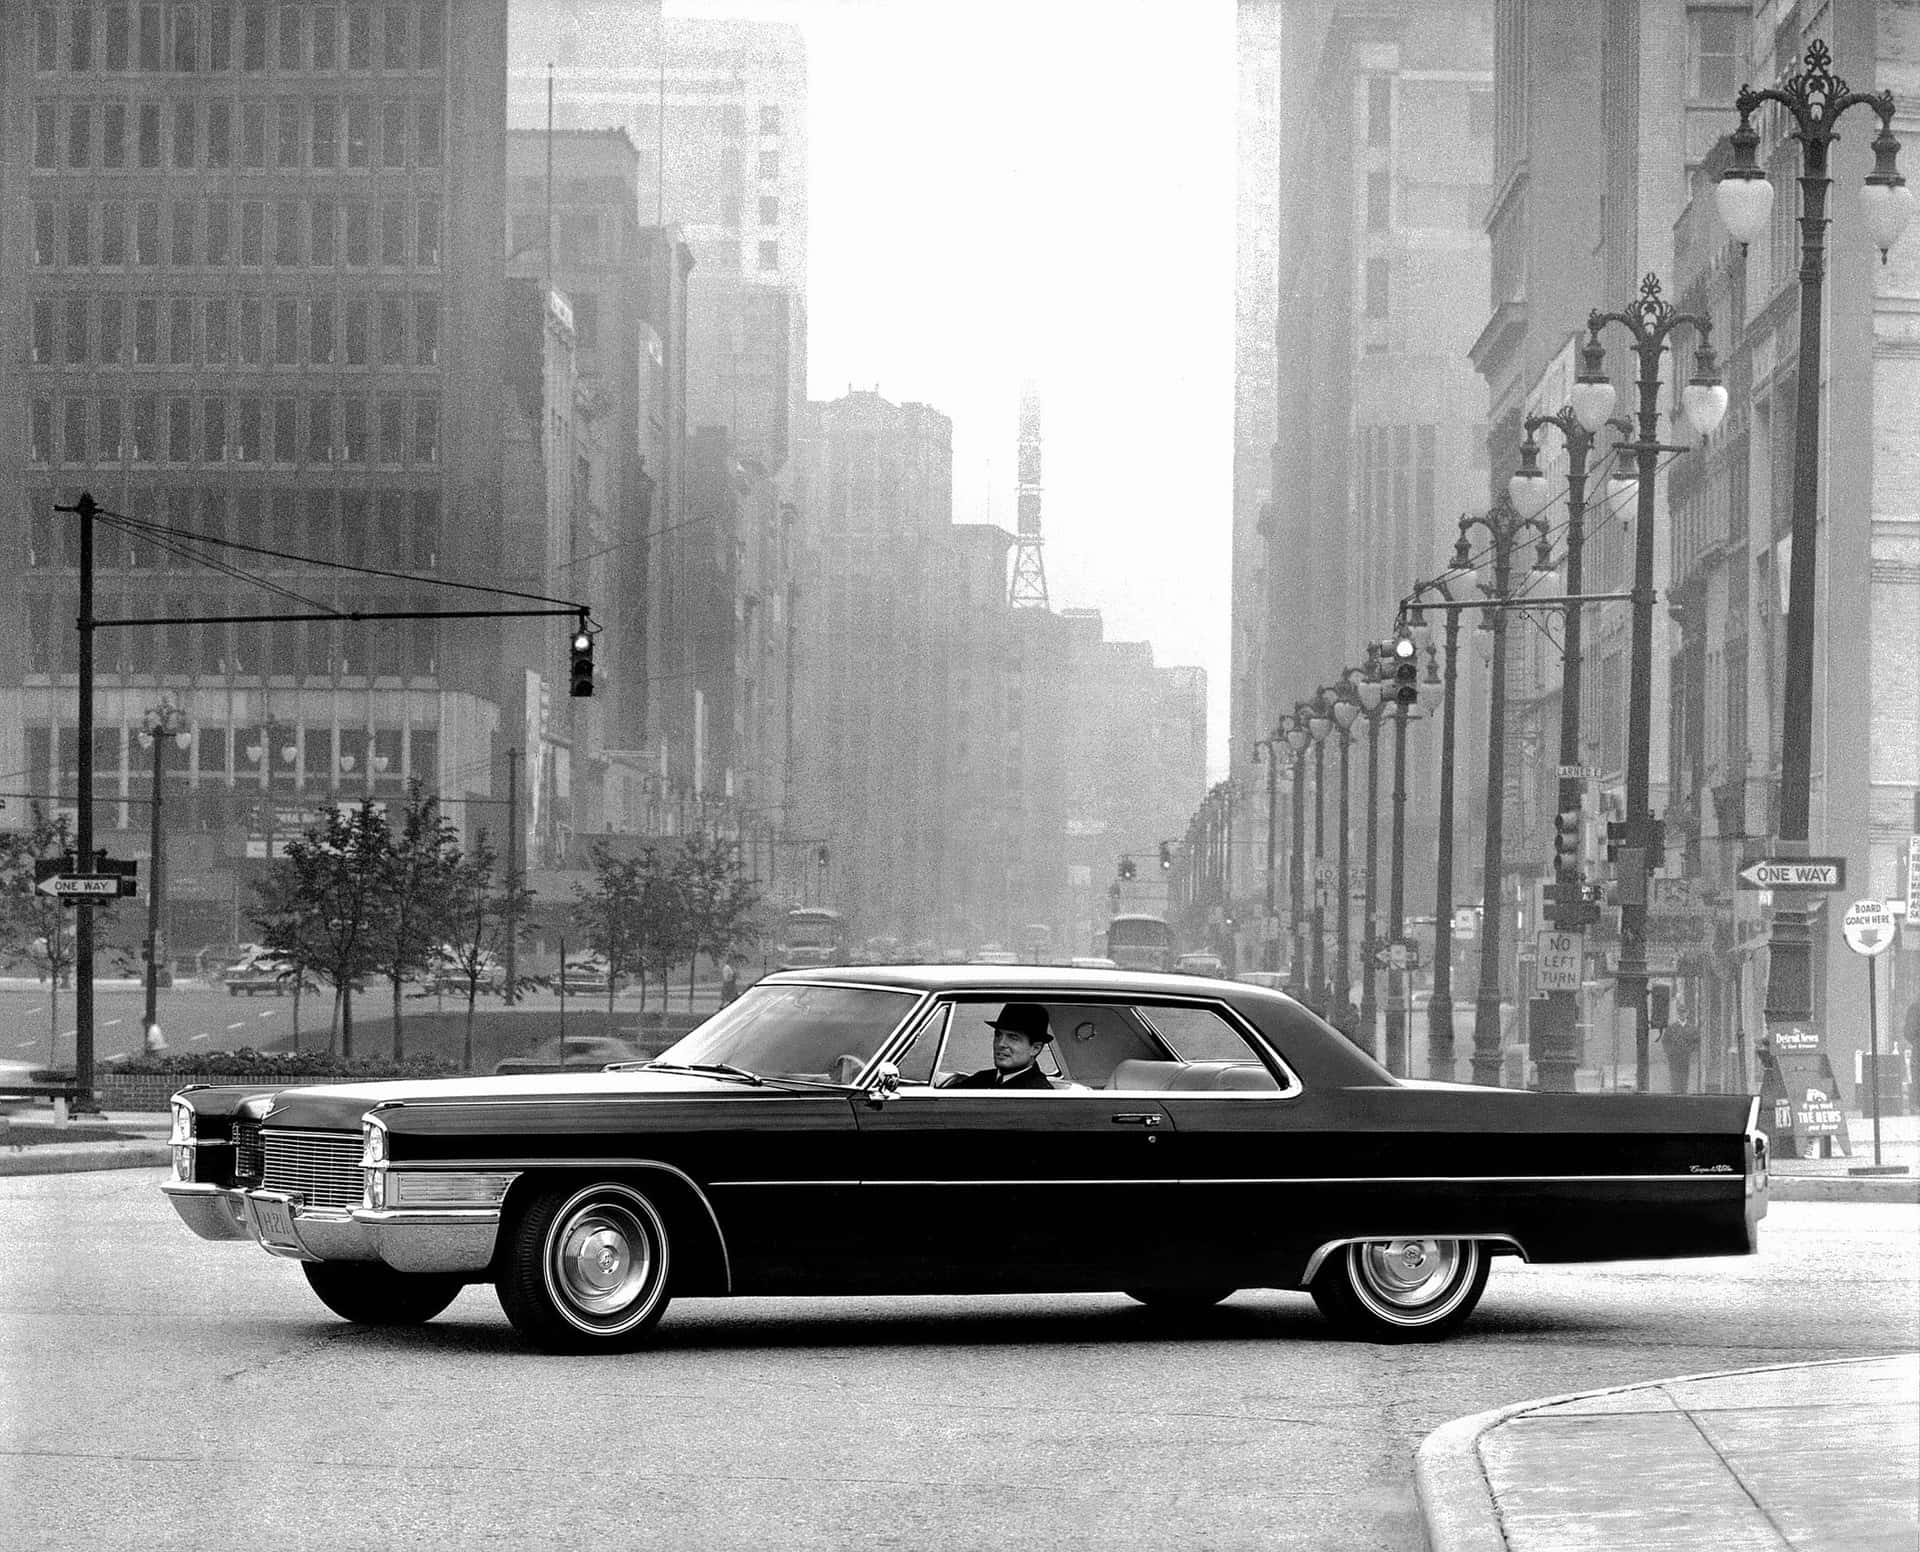 Luxury and Elegance - Cadillac Deville Wallpaper